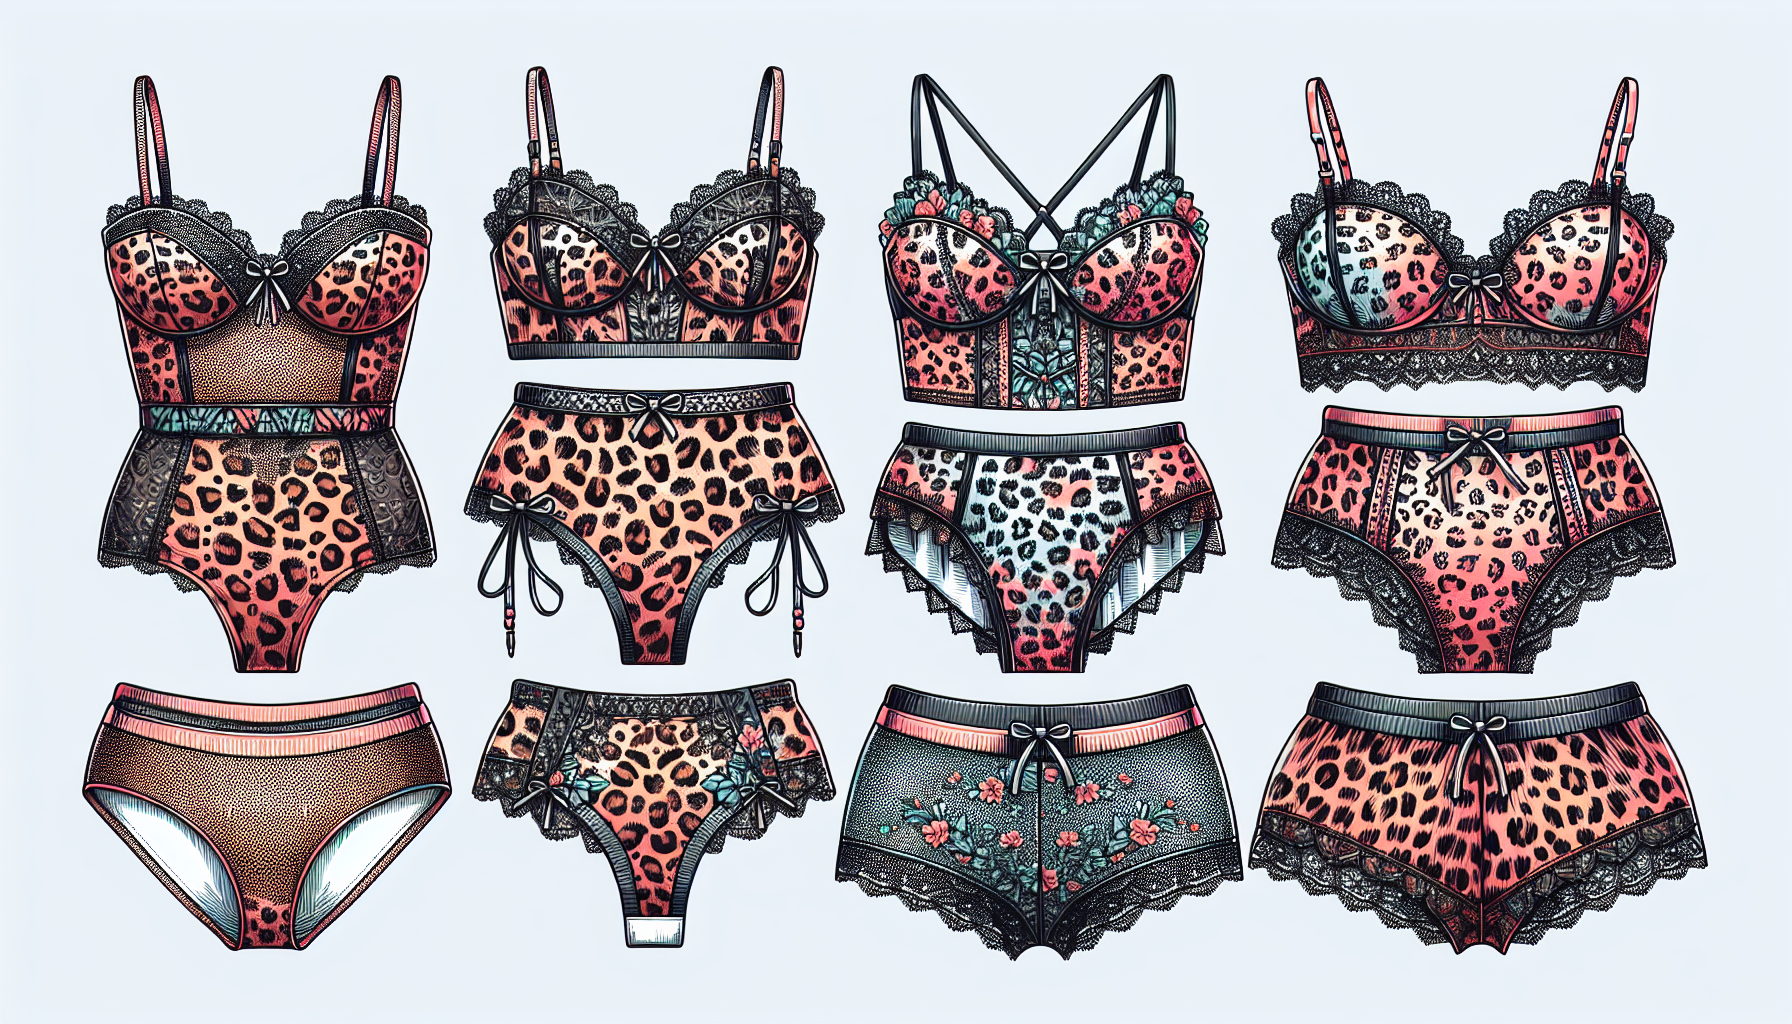 7 sizzling leopard print lingerie sets to spice up